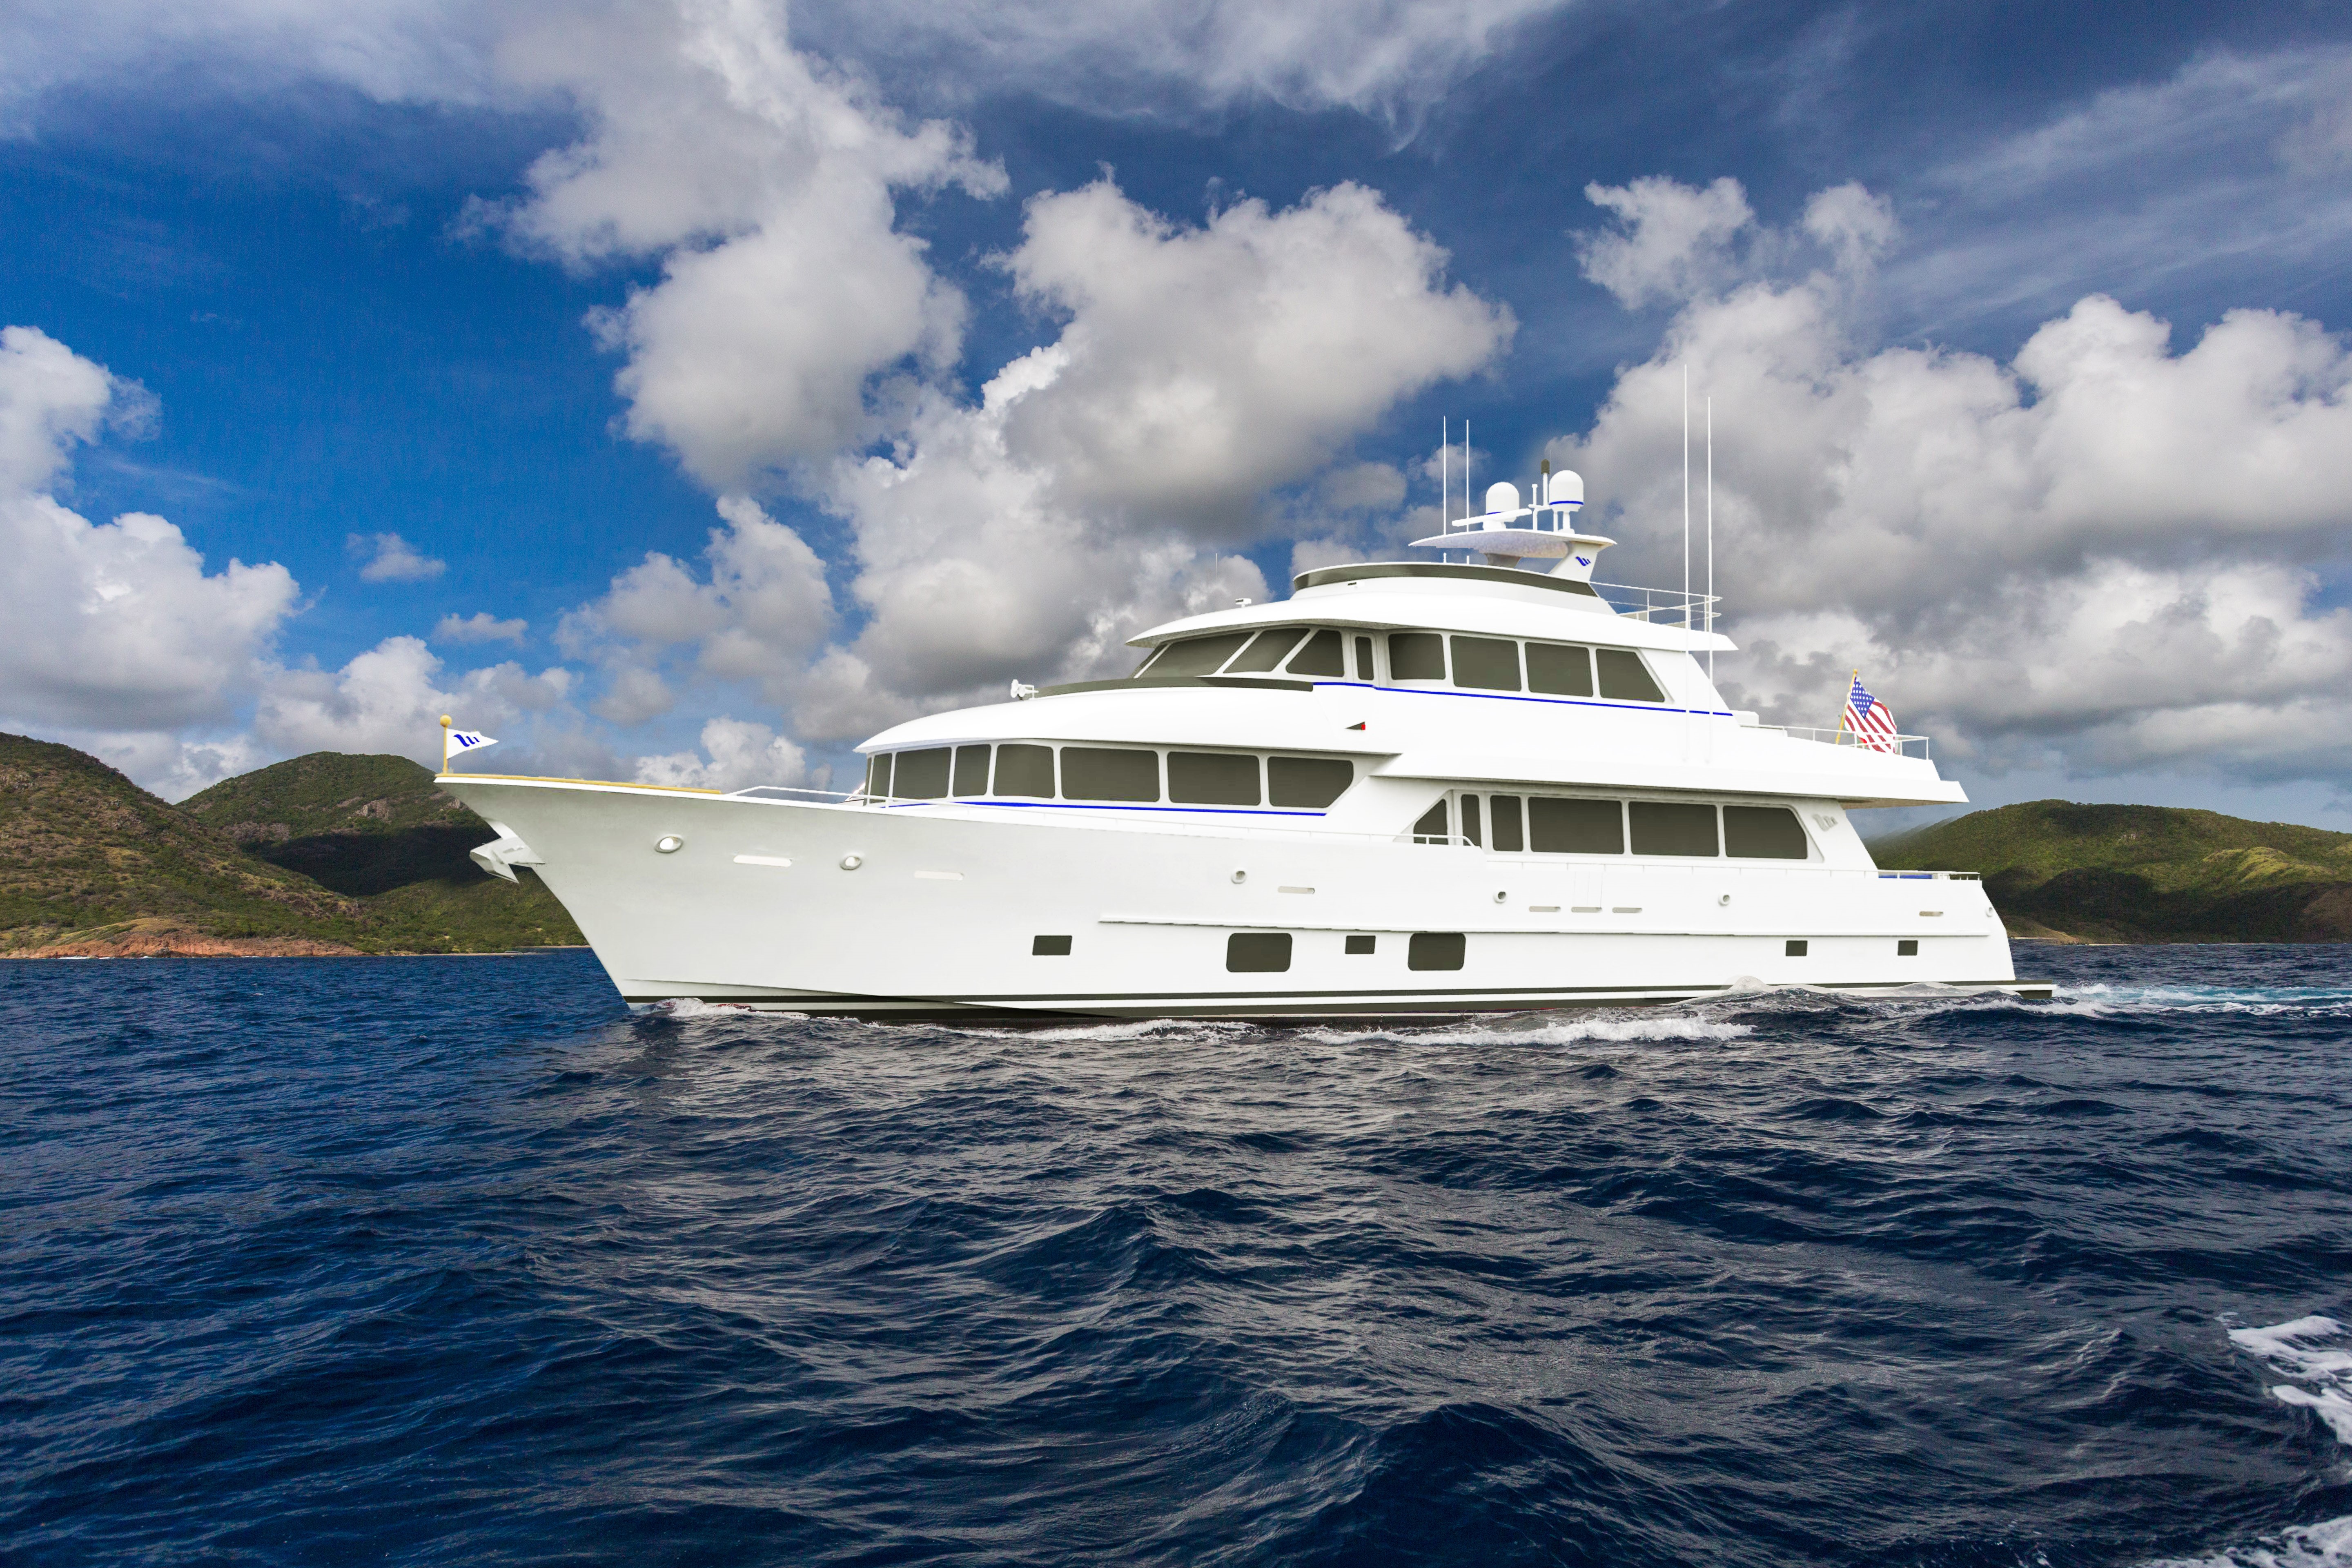 108 PARAGON TRI-DECK charter specs and number of guests